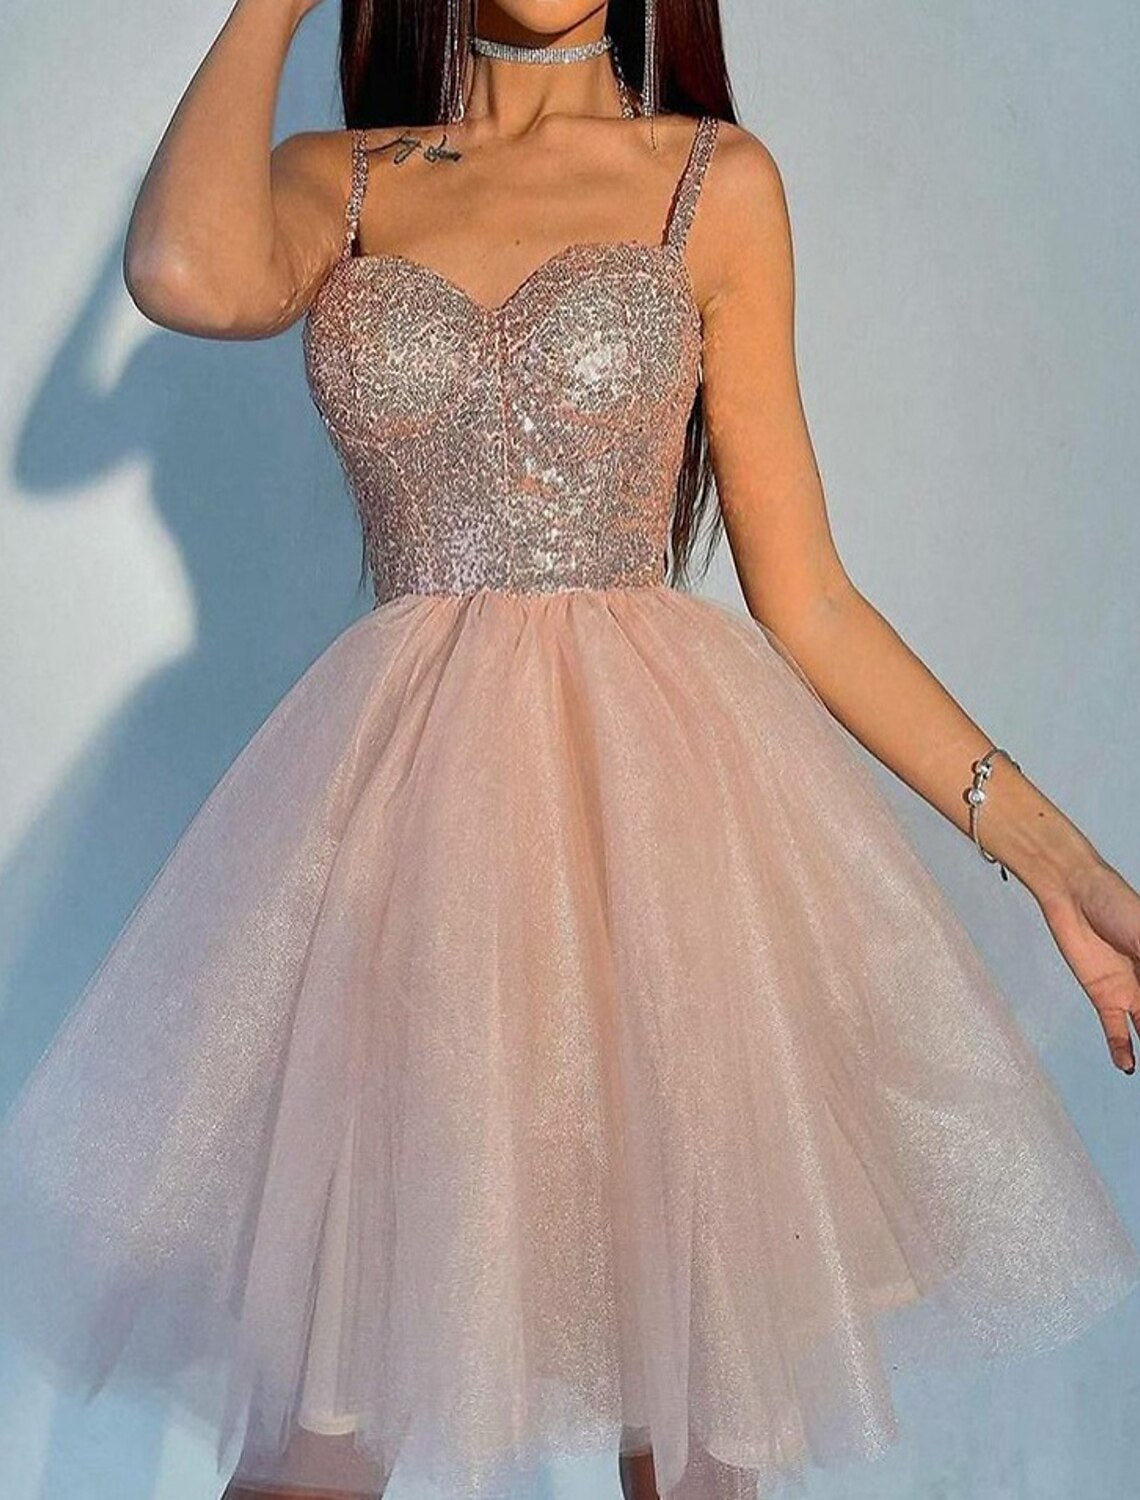 Ball Gown A-Line Sparkle & Shine Puffy Cocktail Party Prom Dress Spaghetti Strap Short Sleeve Knee Length Tulle with Sequin Tier